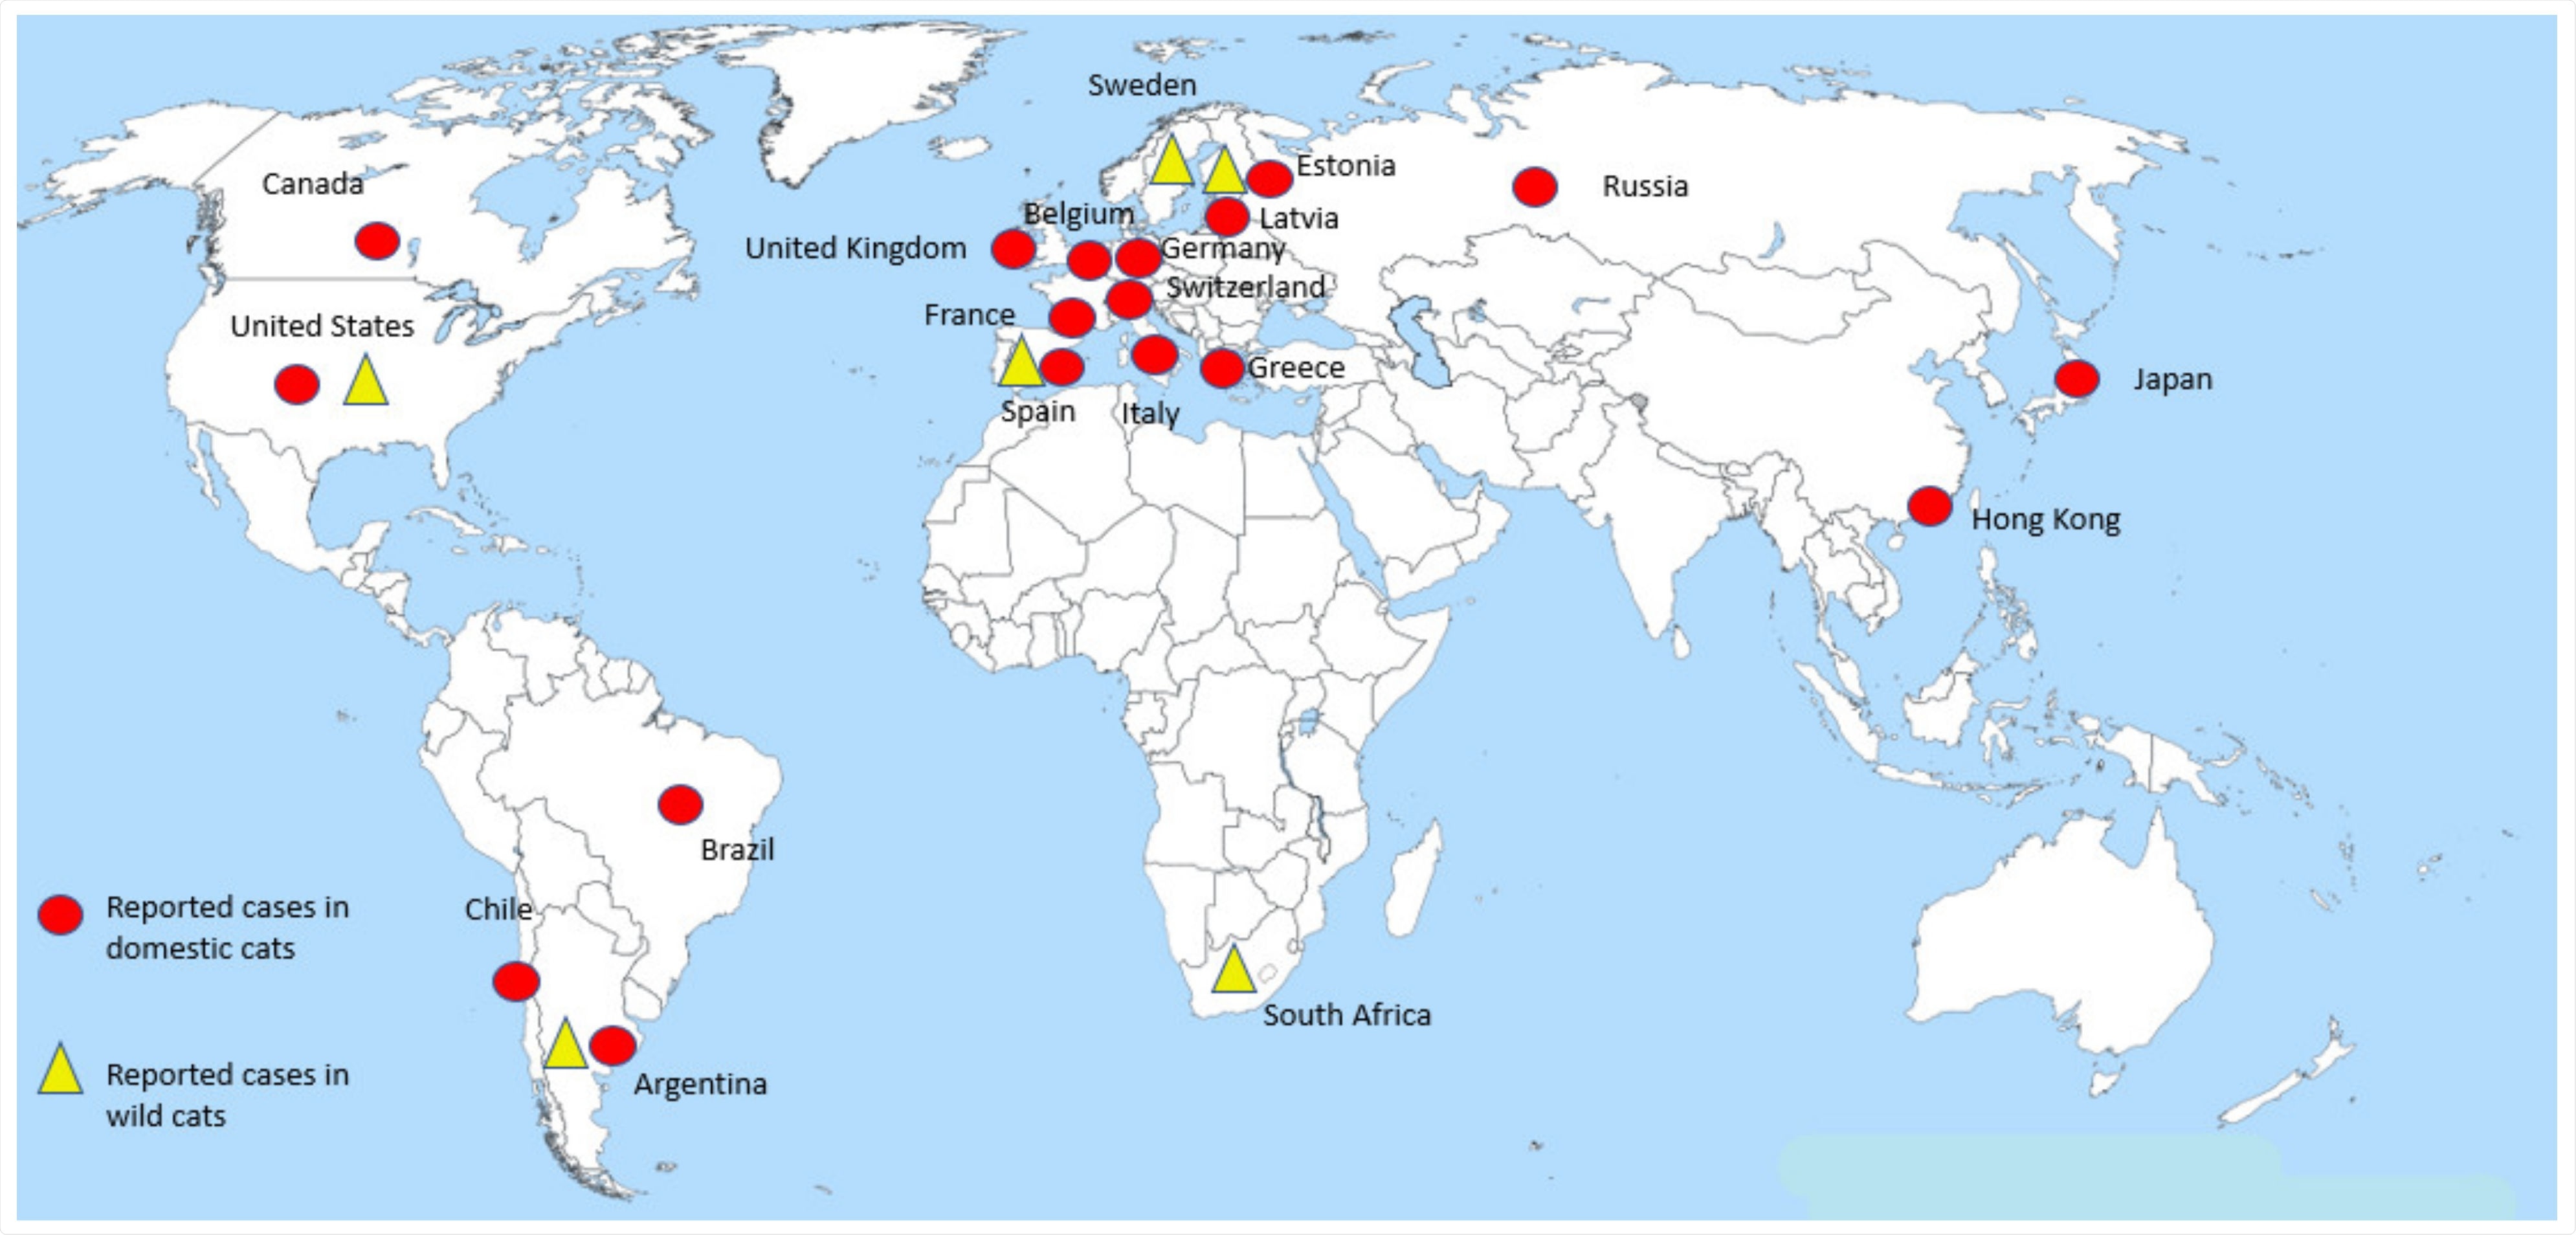 Distribution of reported cases of SARS-CoV-2 in domestic and wild cats worldwide.  Red circles indicate cases in domestic cats that were reported by country.  The virus has been detected in these animals on at least three different continents (America, Europe and Asia).  Yellow triangles denote cases of captive wild cats that have been reported in the Americas, Europe and Africa.